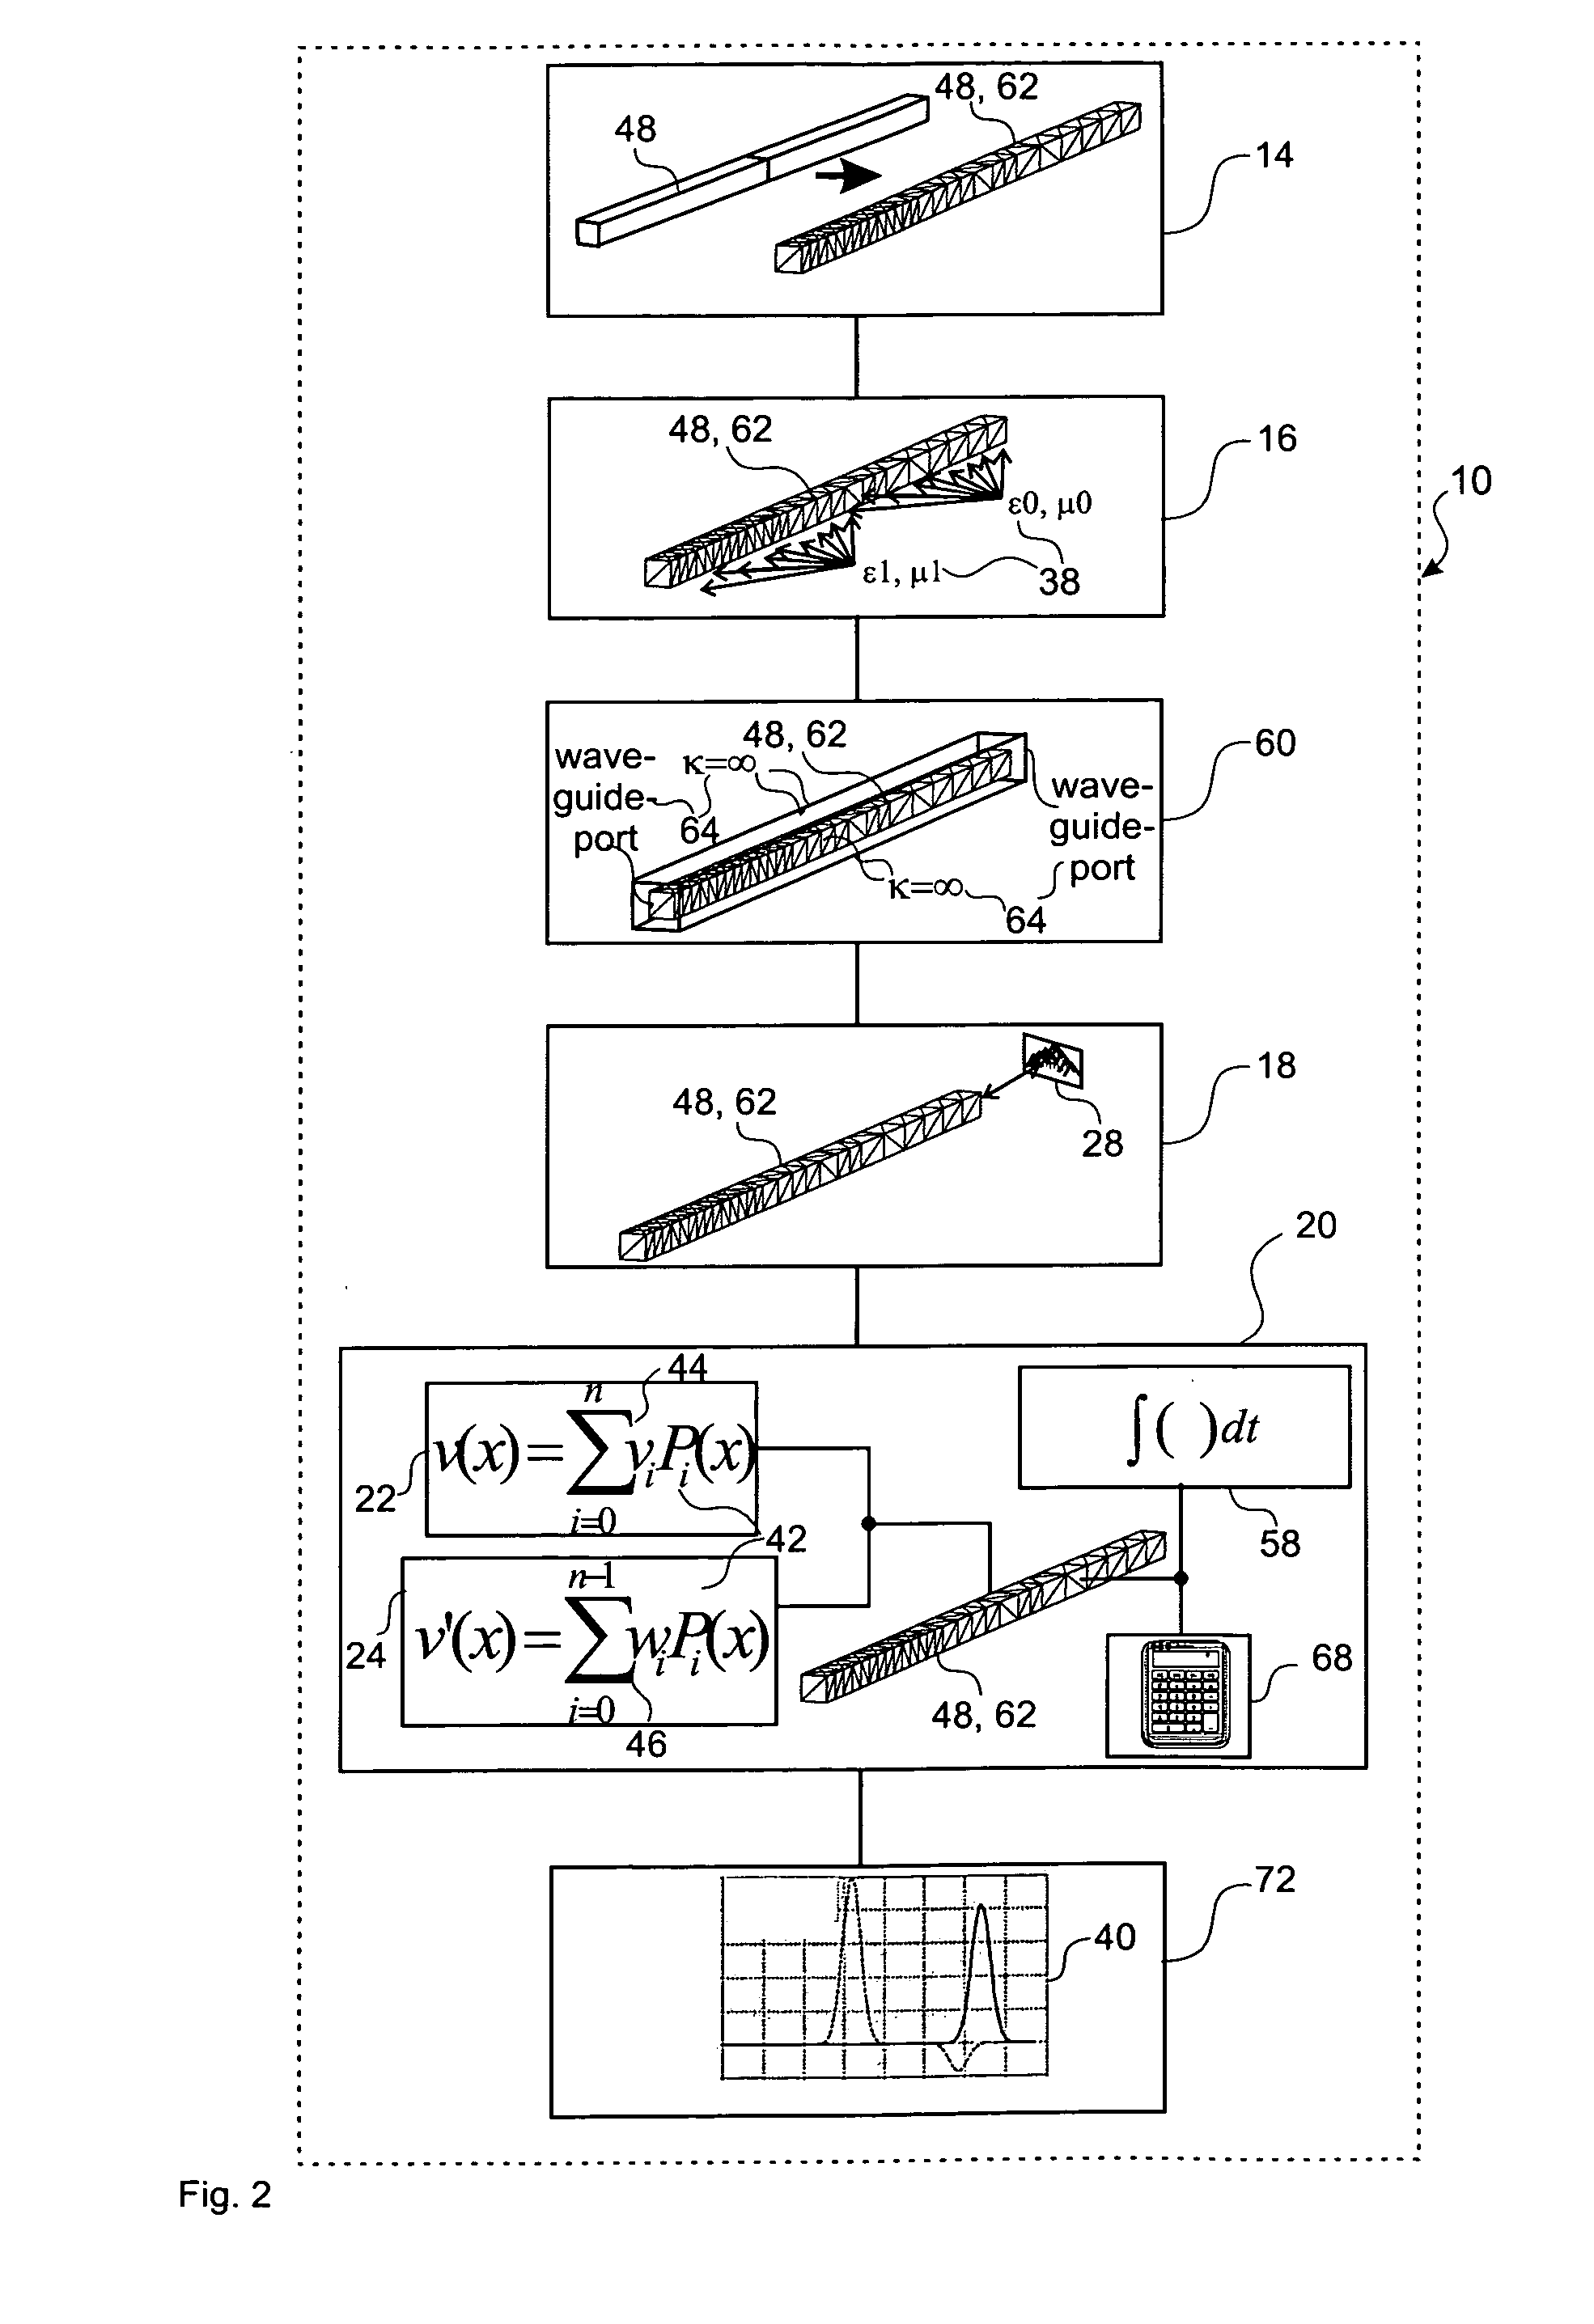 Method, device and computer program product for determining an electromagnetic near-field of a field excitation source of an electrical system